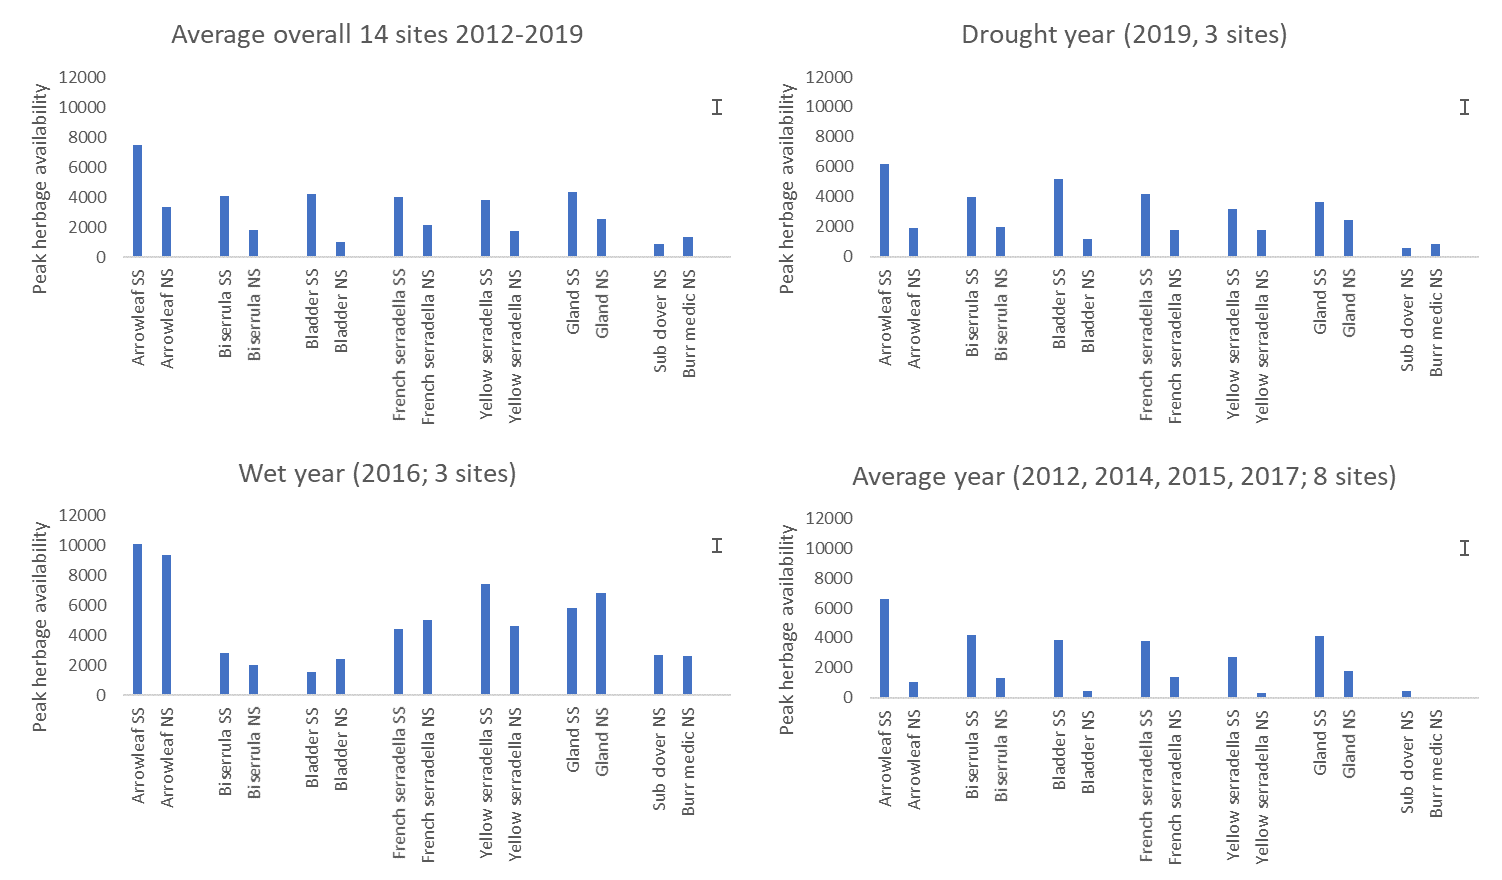 These four column graphs show the peak biomass (herbage) production (kg DM/ha) for a range of annual legumes sown either as unscarified/in-pod seed in mid to late summer (SS) or as scarified seed in May (NS) averaged across 14 sites from 2012-2019. The data is then divided into peak biomass production in drought, wet and average rainfall years. The top left shows the average over the years, Top right shows 2019 drought year, bottom left shows 2016 wet year and bottom right shows average years.